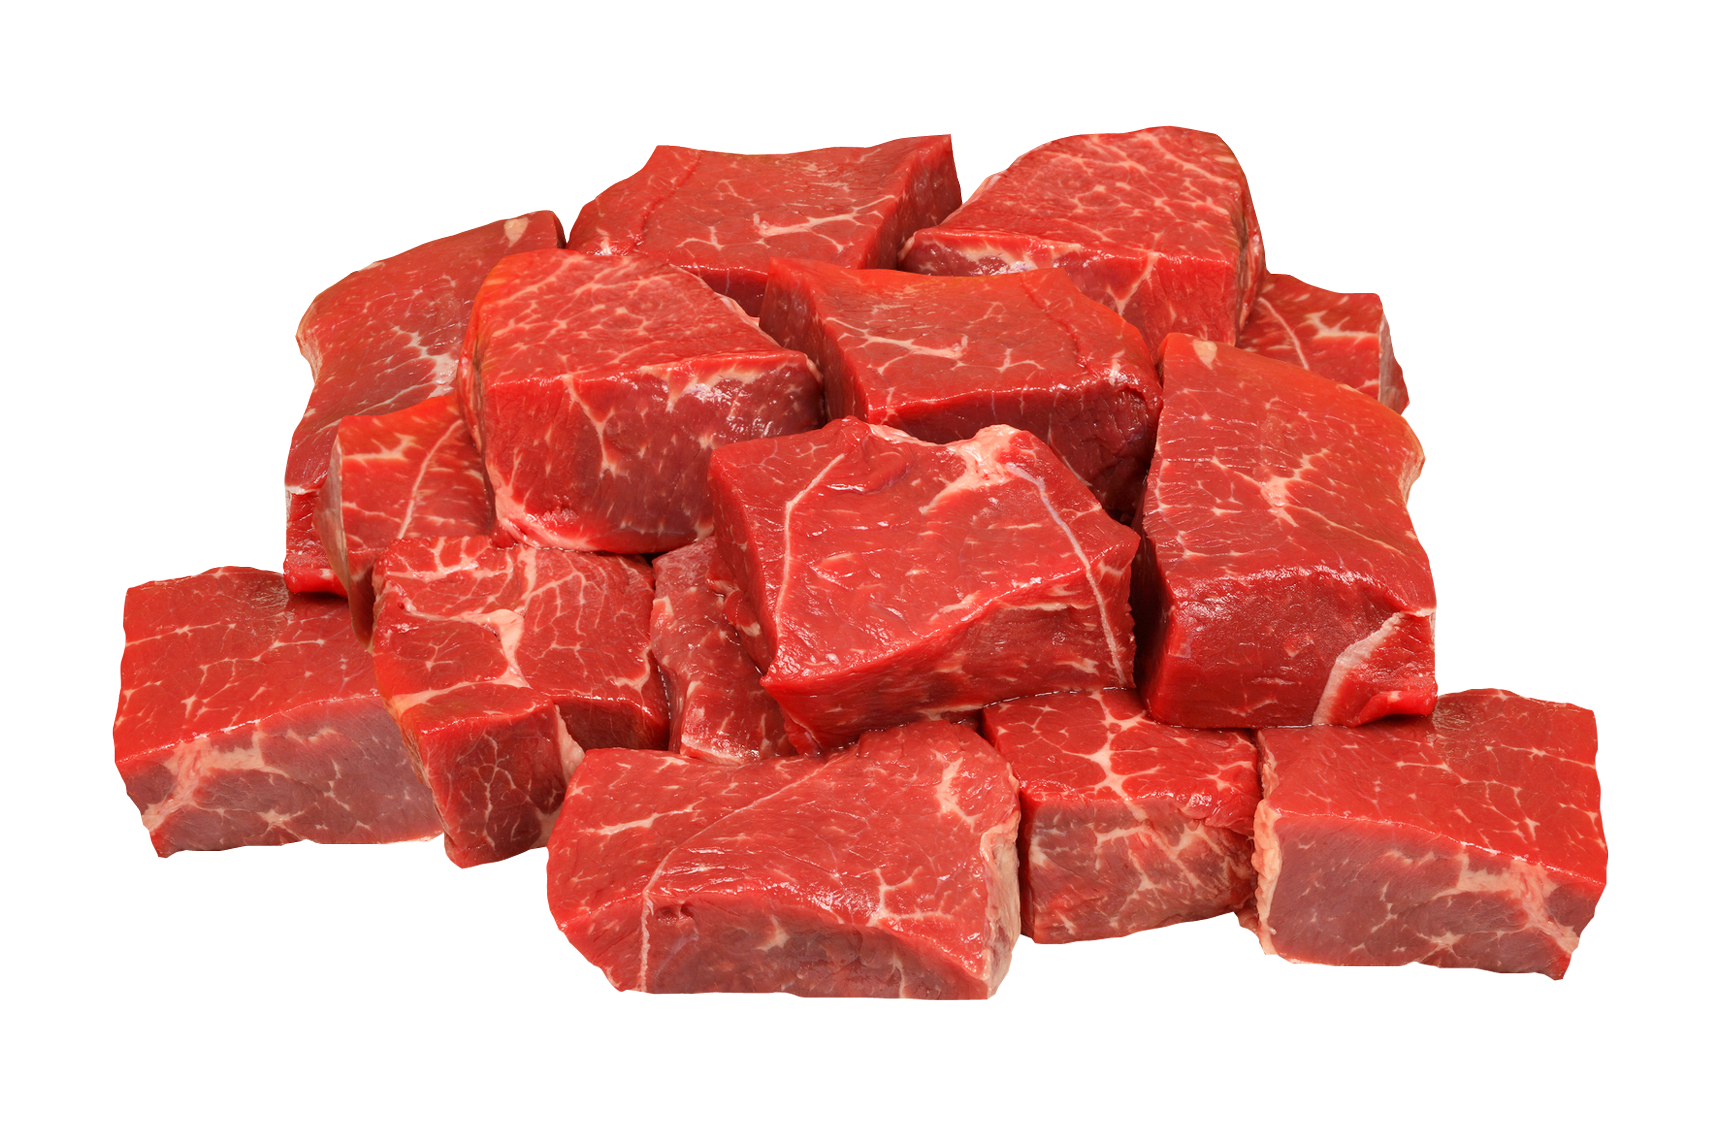 A Pile Of Raw Meat